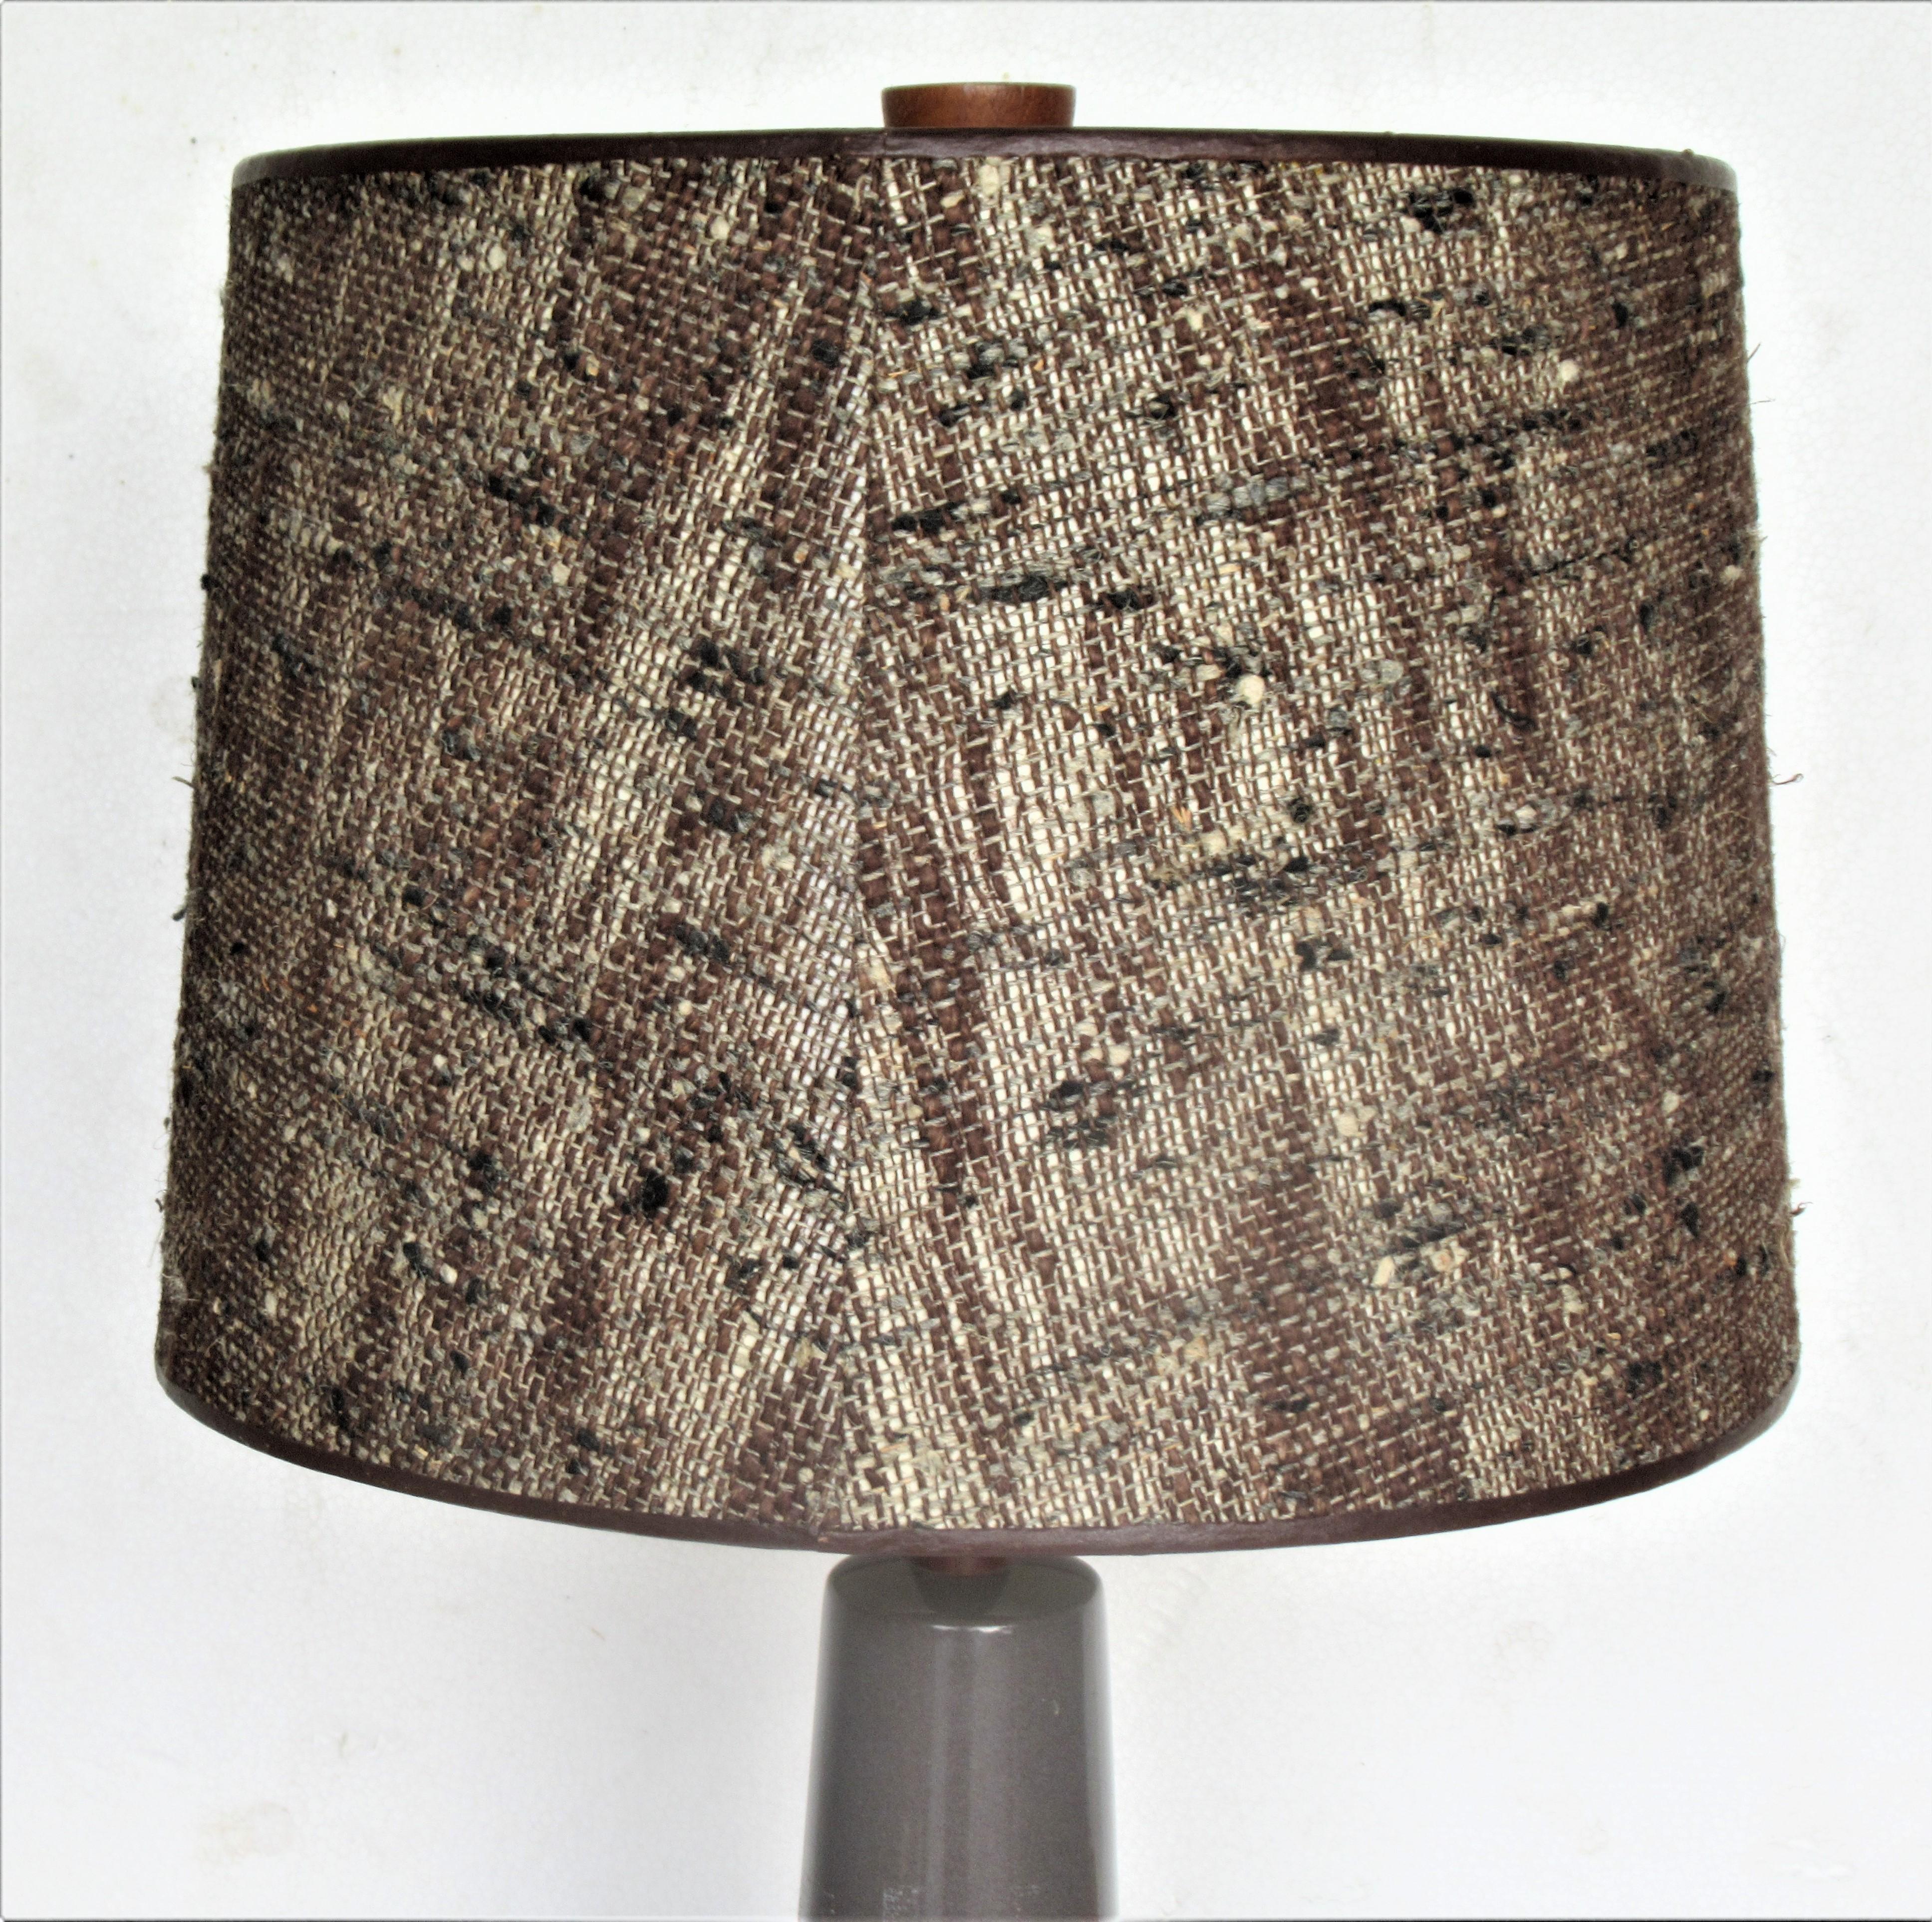 Jane and Gordon Martz gloss gray glazed ceramic table lamp for Marshall Studios with the great original period woven natural fiber and leather looking trimmed shade and walnut finial ( incise signed Martz into ceramic and Marshall Studios blue paper